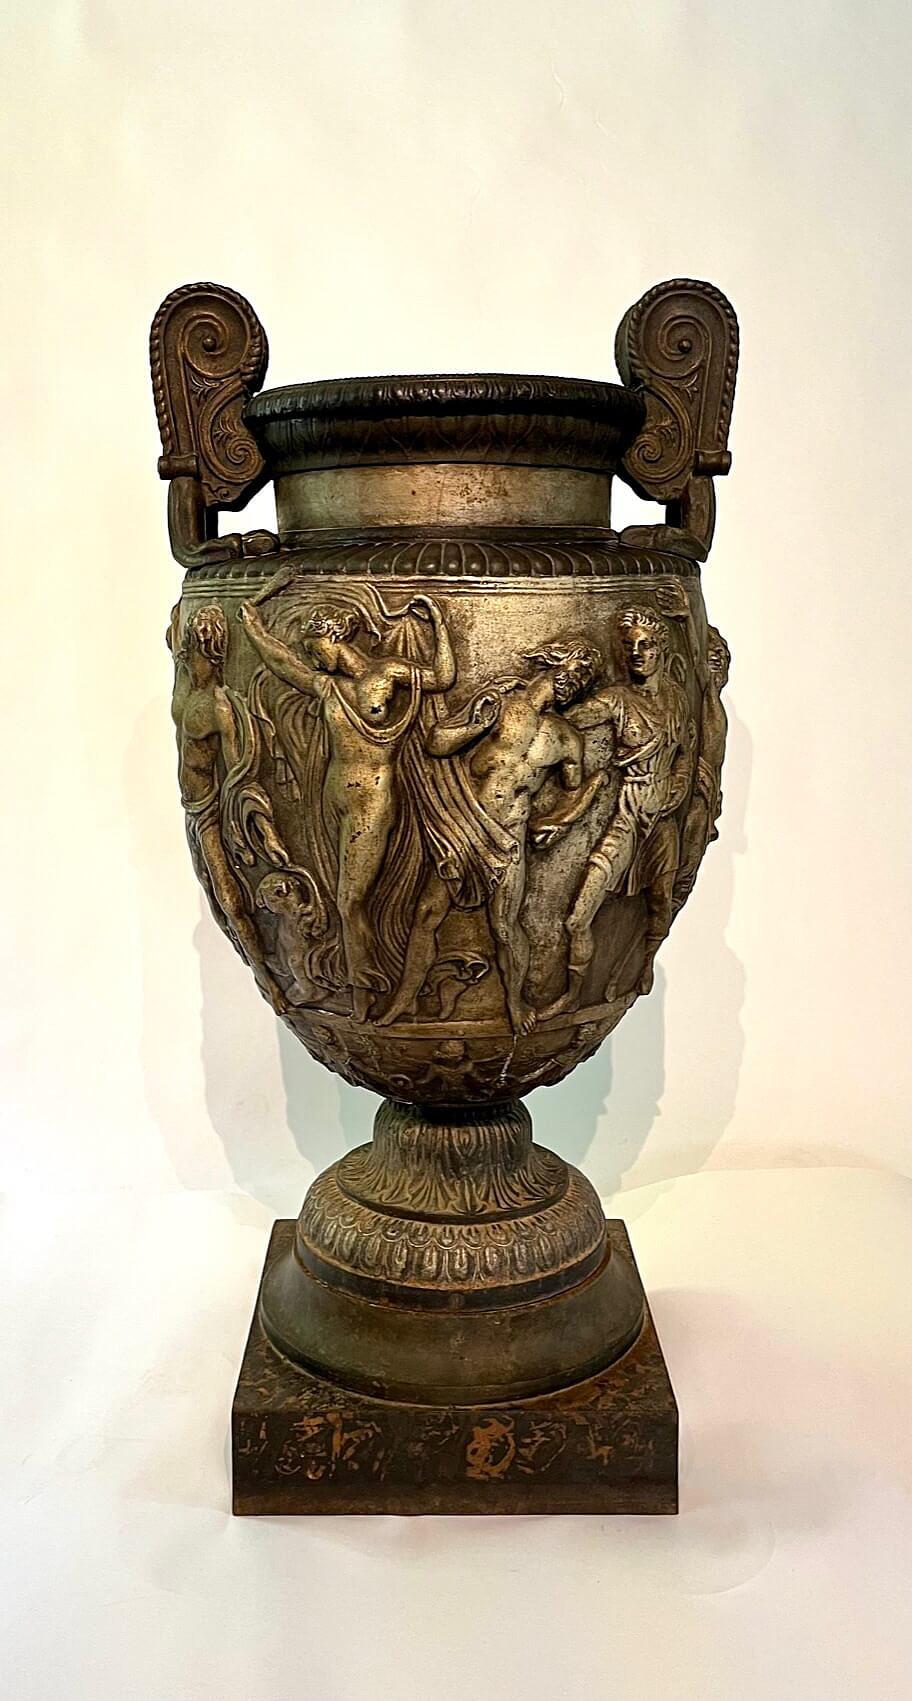 Neoclassical Revival Cast Iron Scale Model of the Townley Vase, Val d'Osne Foundry, circa 1870